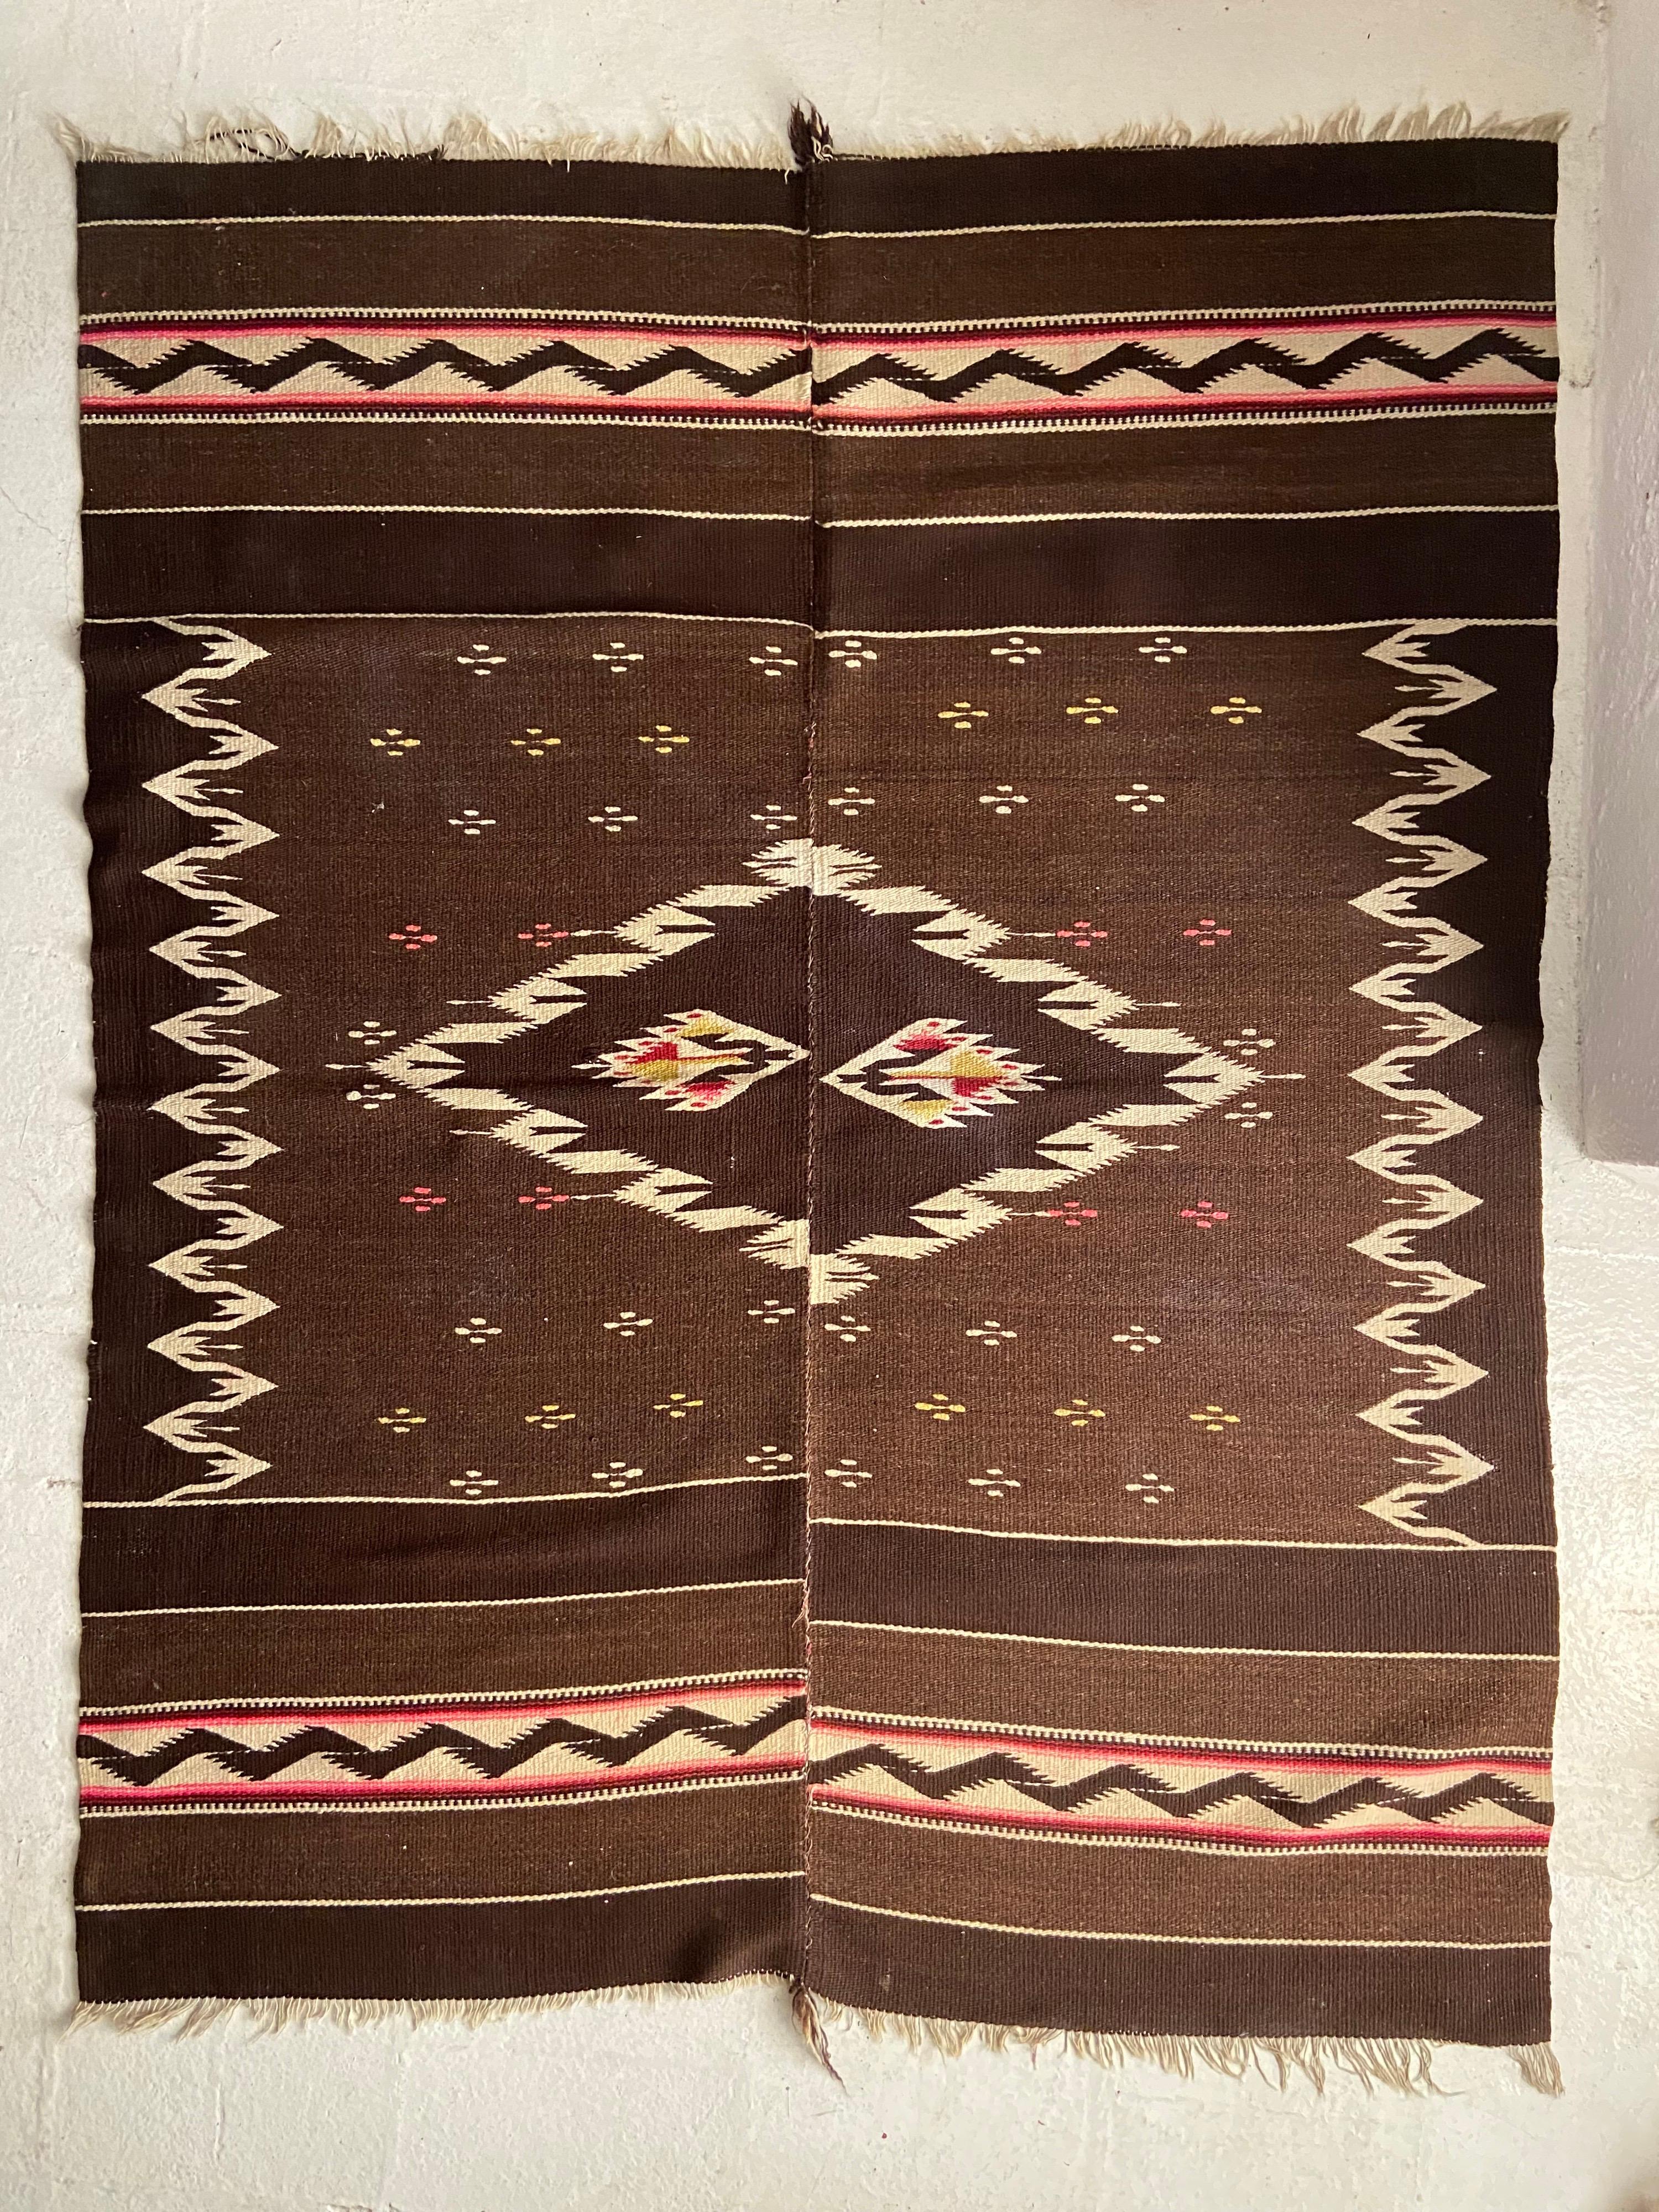 Mid-20th Century Wool Blanket from Oaxaca, Mexico 1